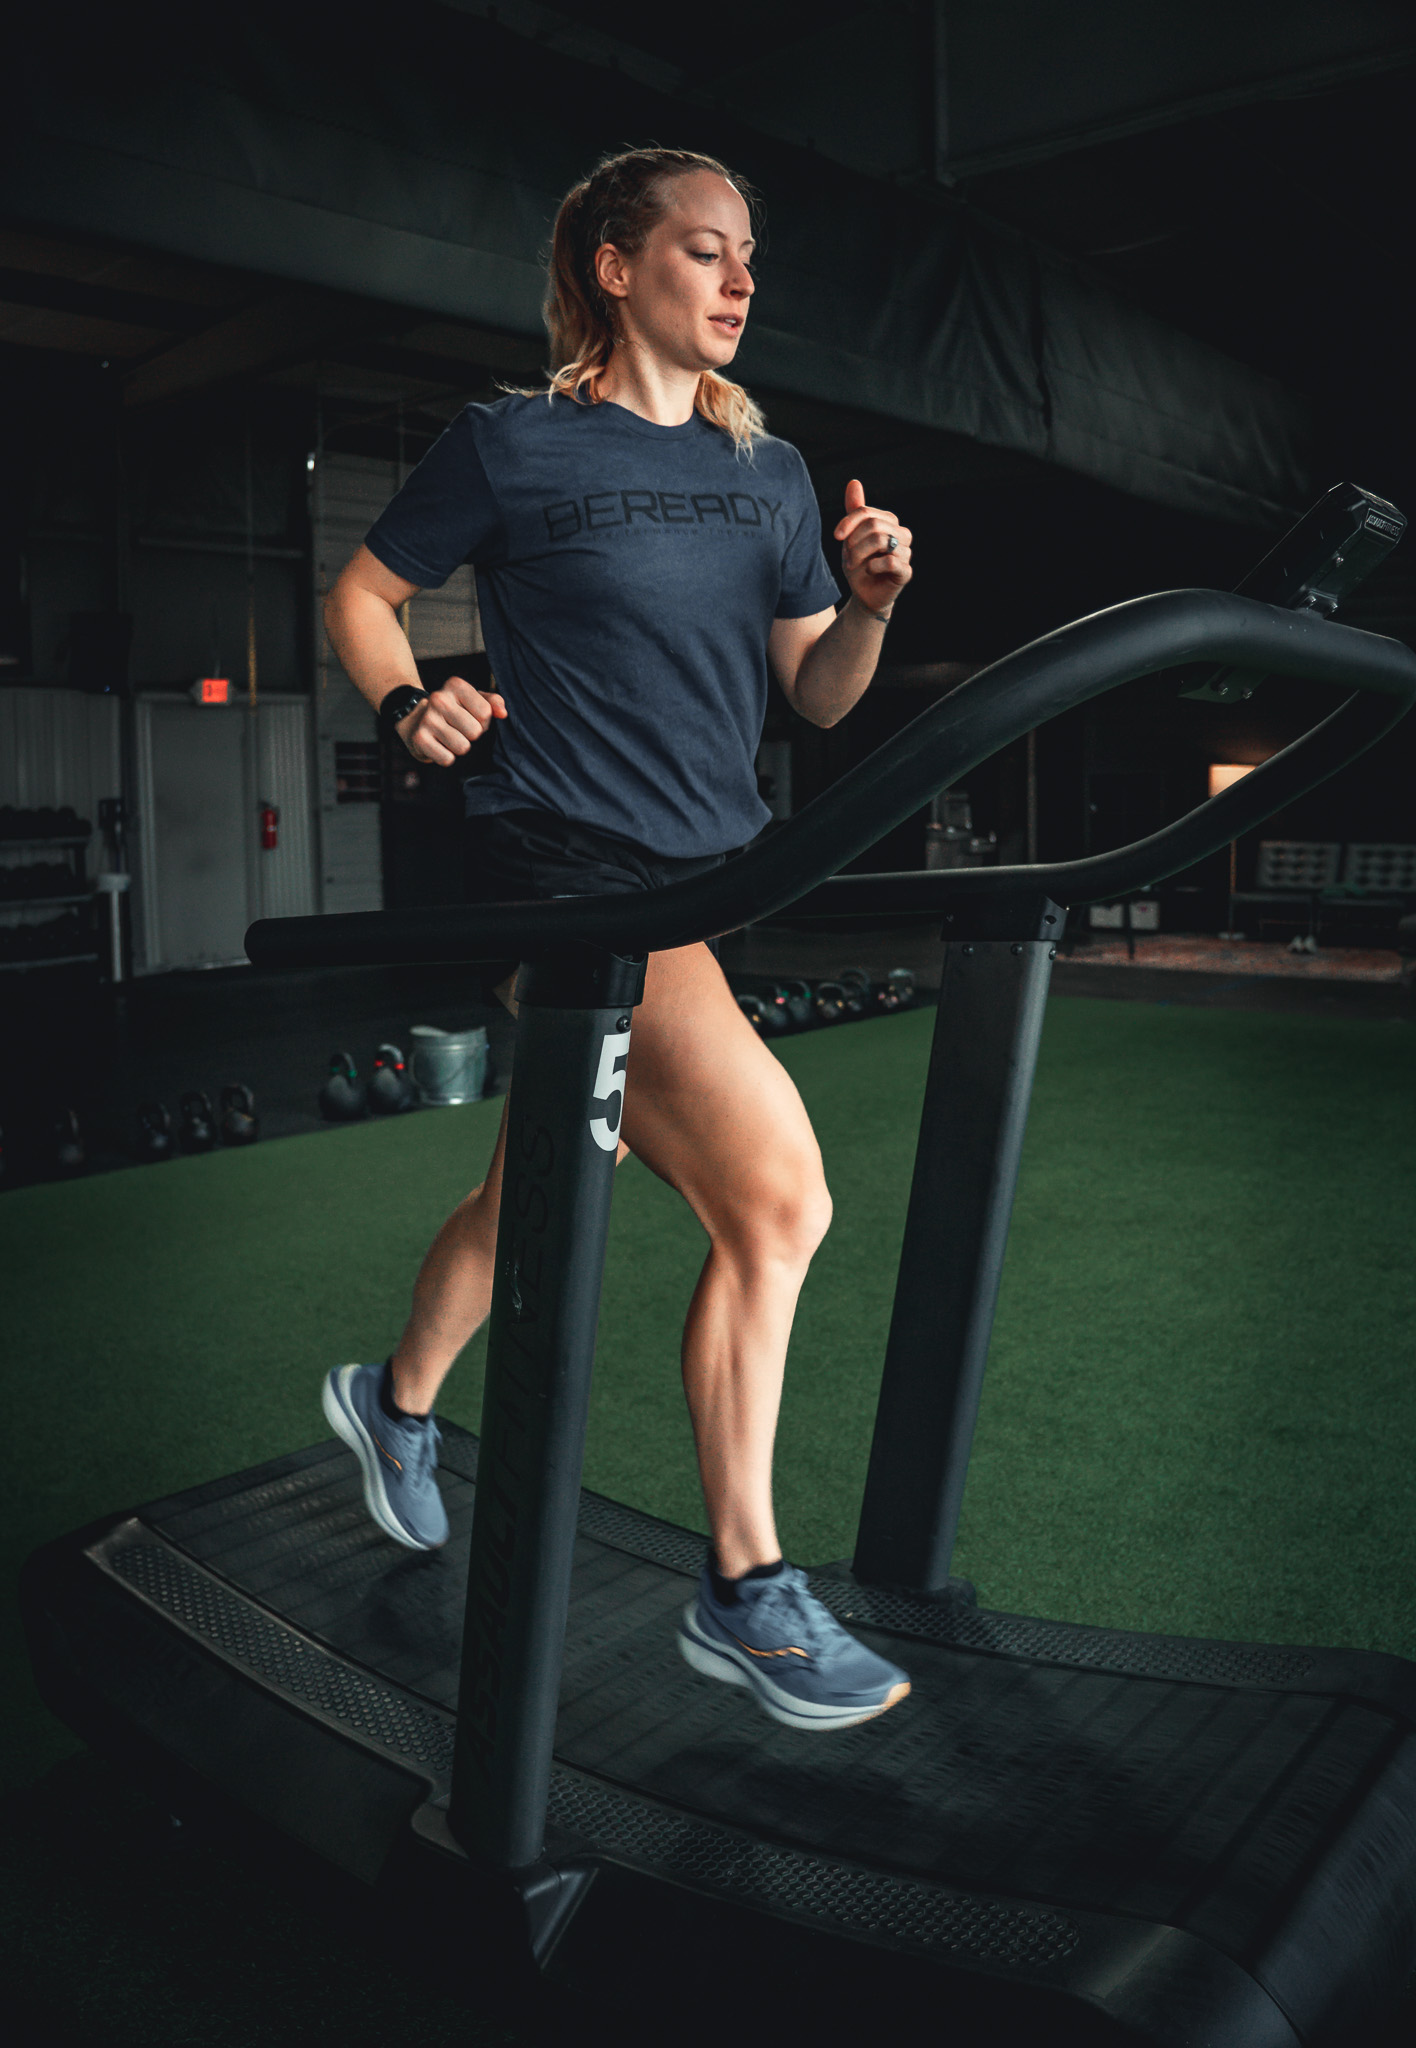 A woman running on a treadmill in a gym.